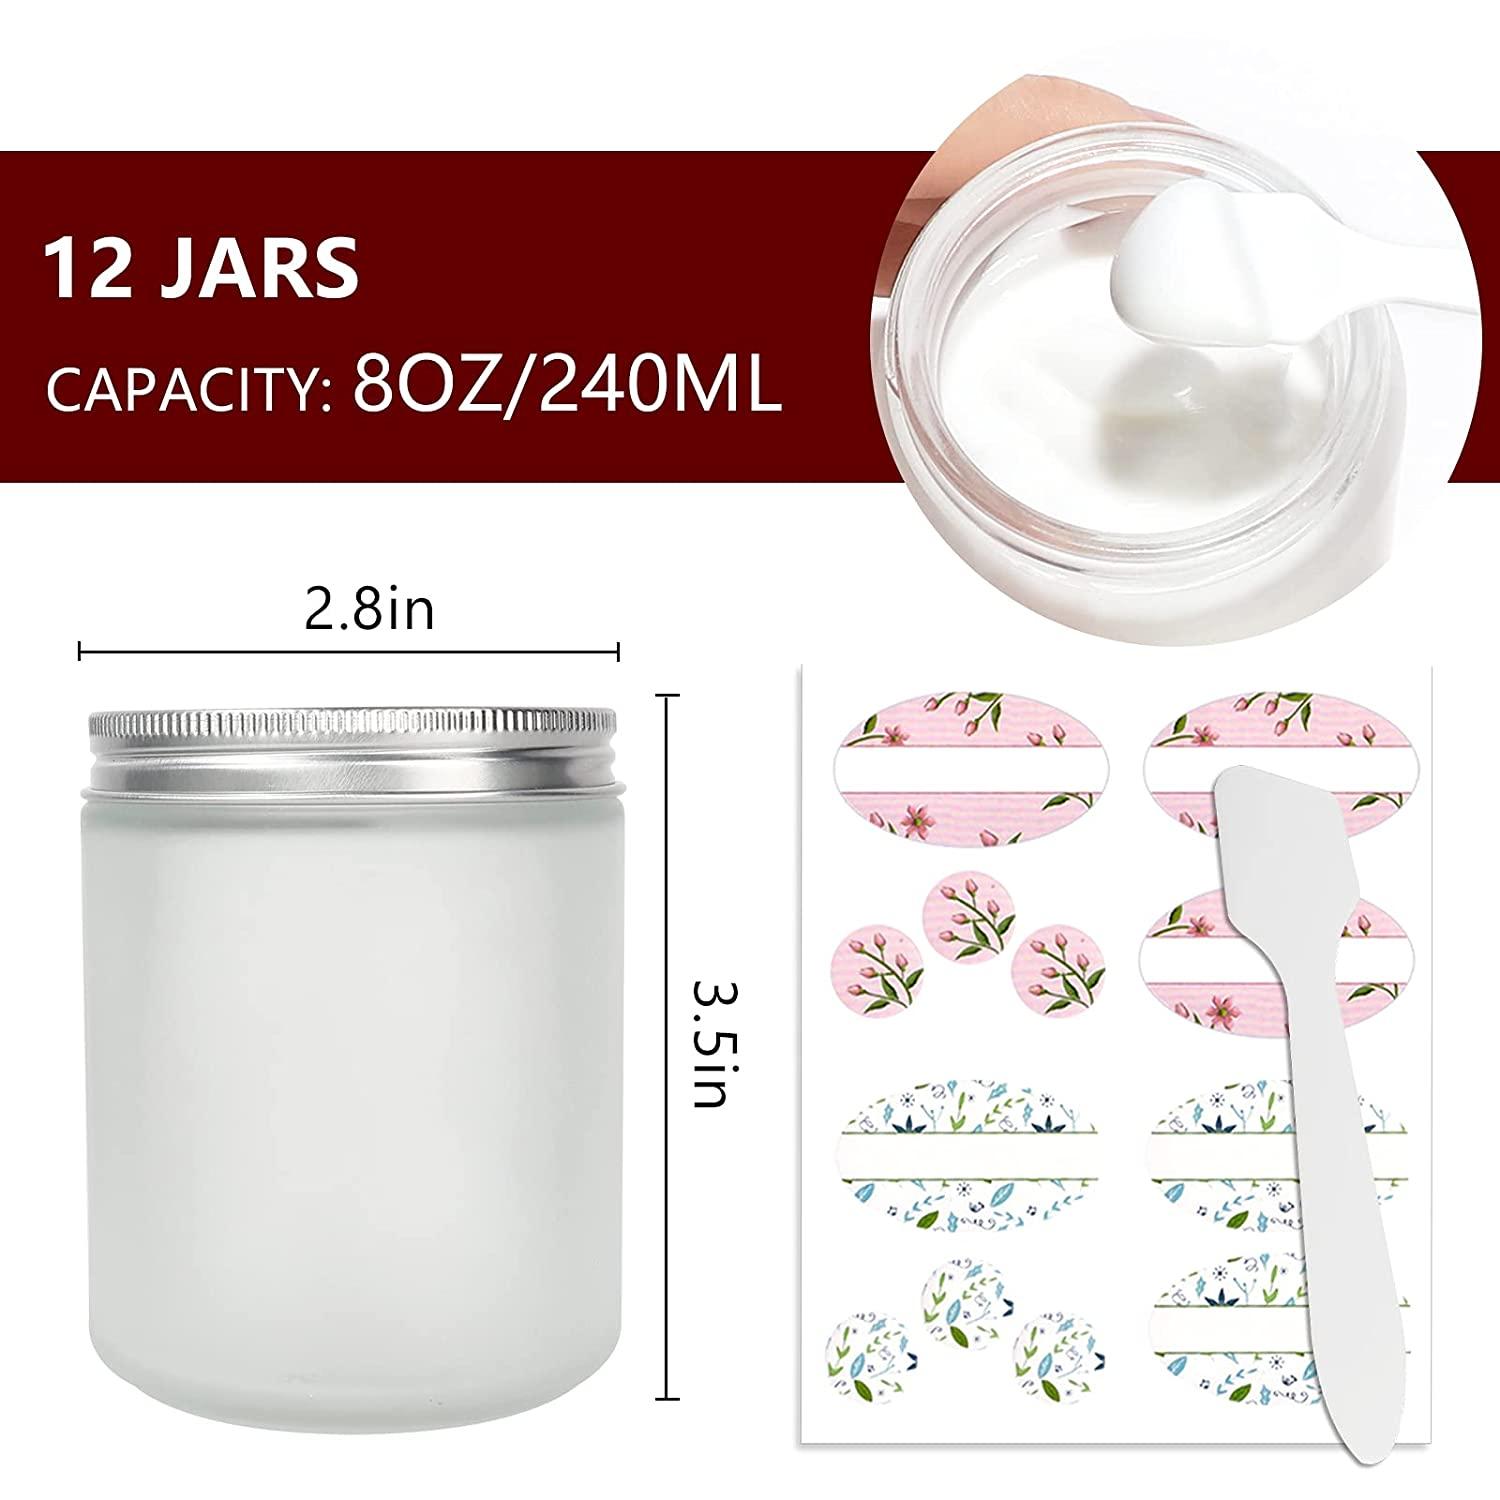 8 oz frosted color glass candle jars